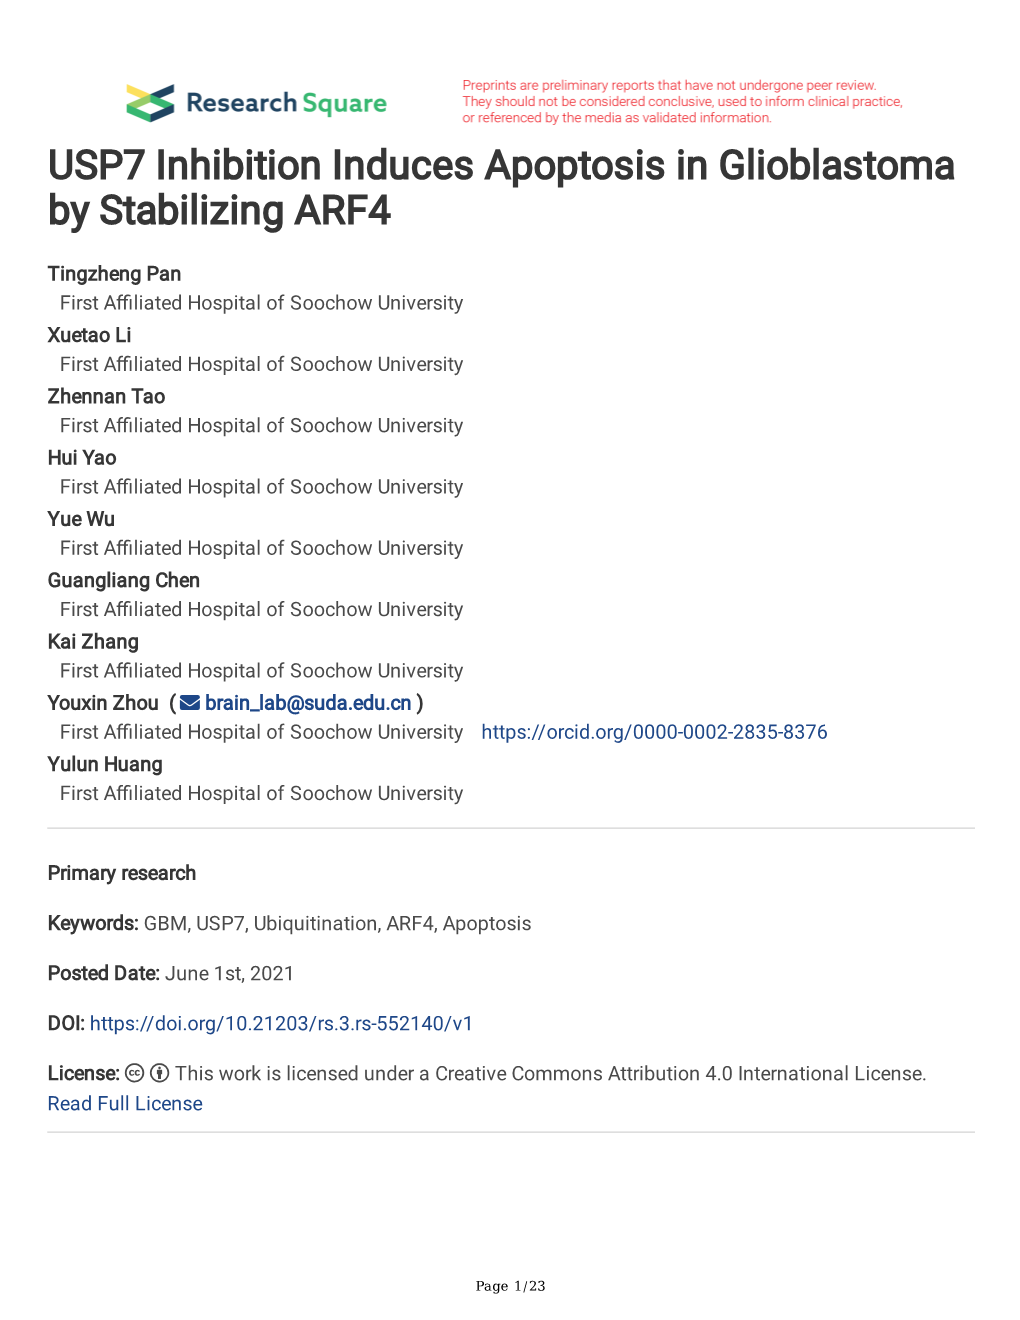 USP7 Inhibition Induces Apoptosis in Glioblastoma by Stabilizing ARF4